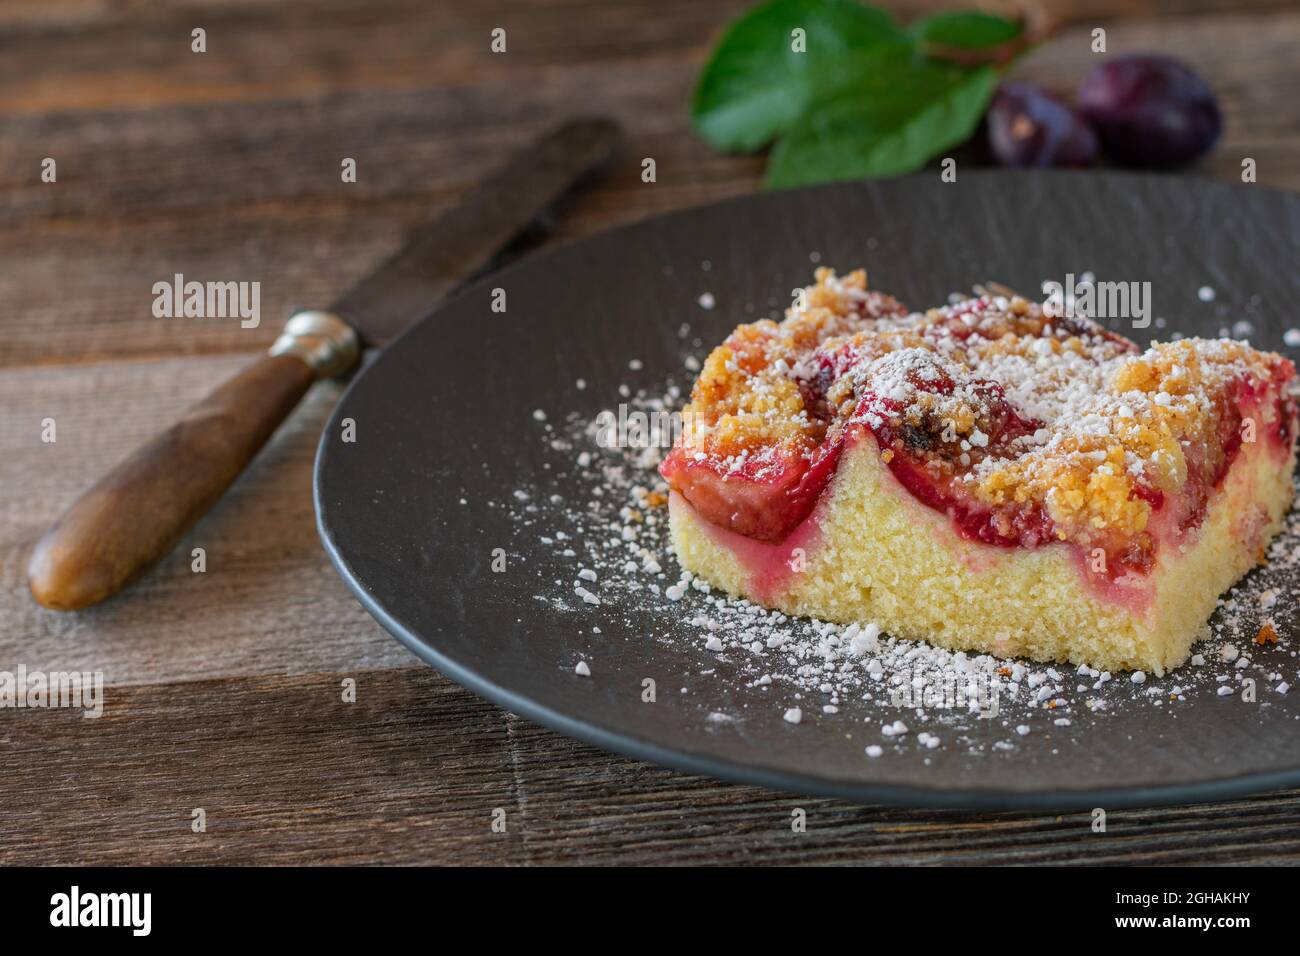 Slice of fresh baked plum crumble cake on a plate on wooden table. Front view with copy space Stock Photo